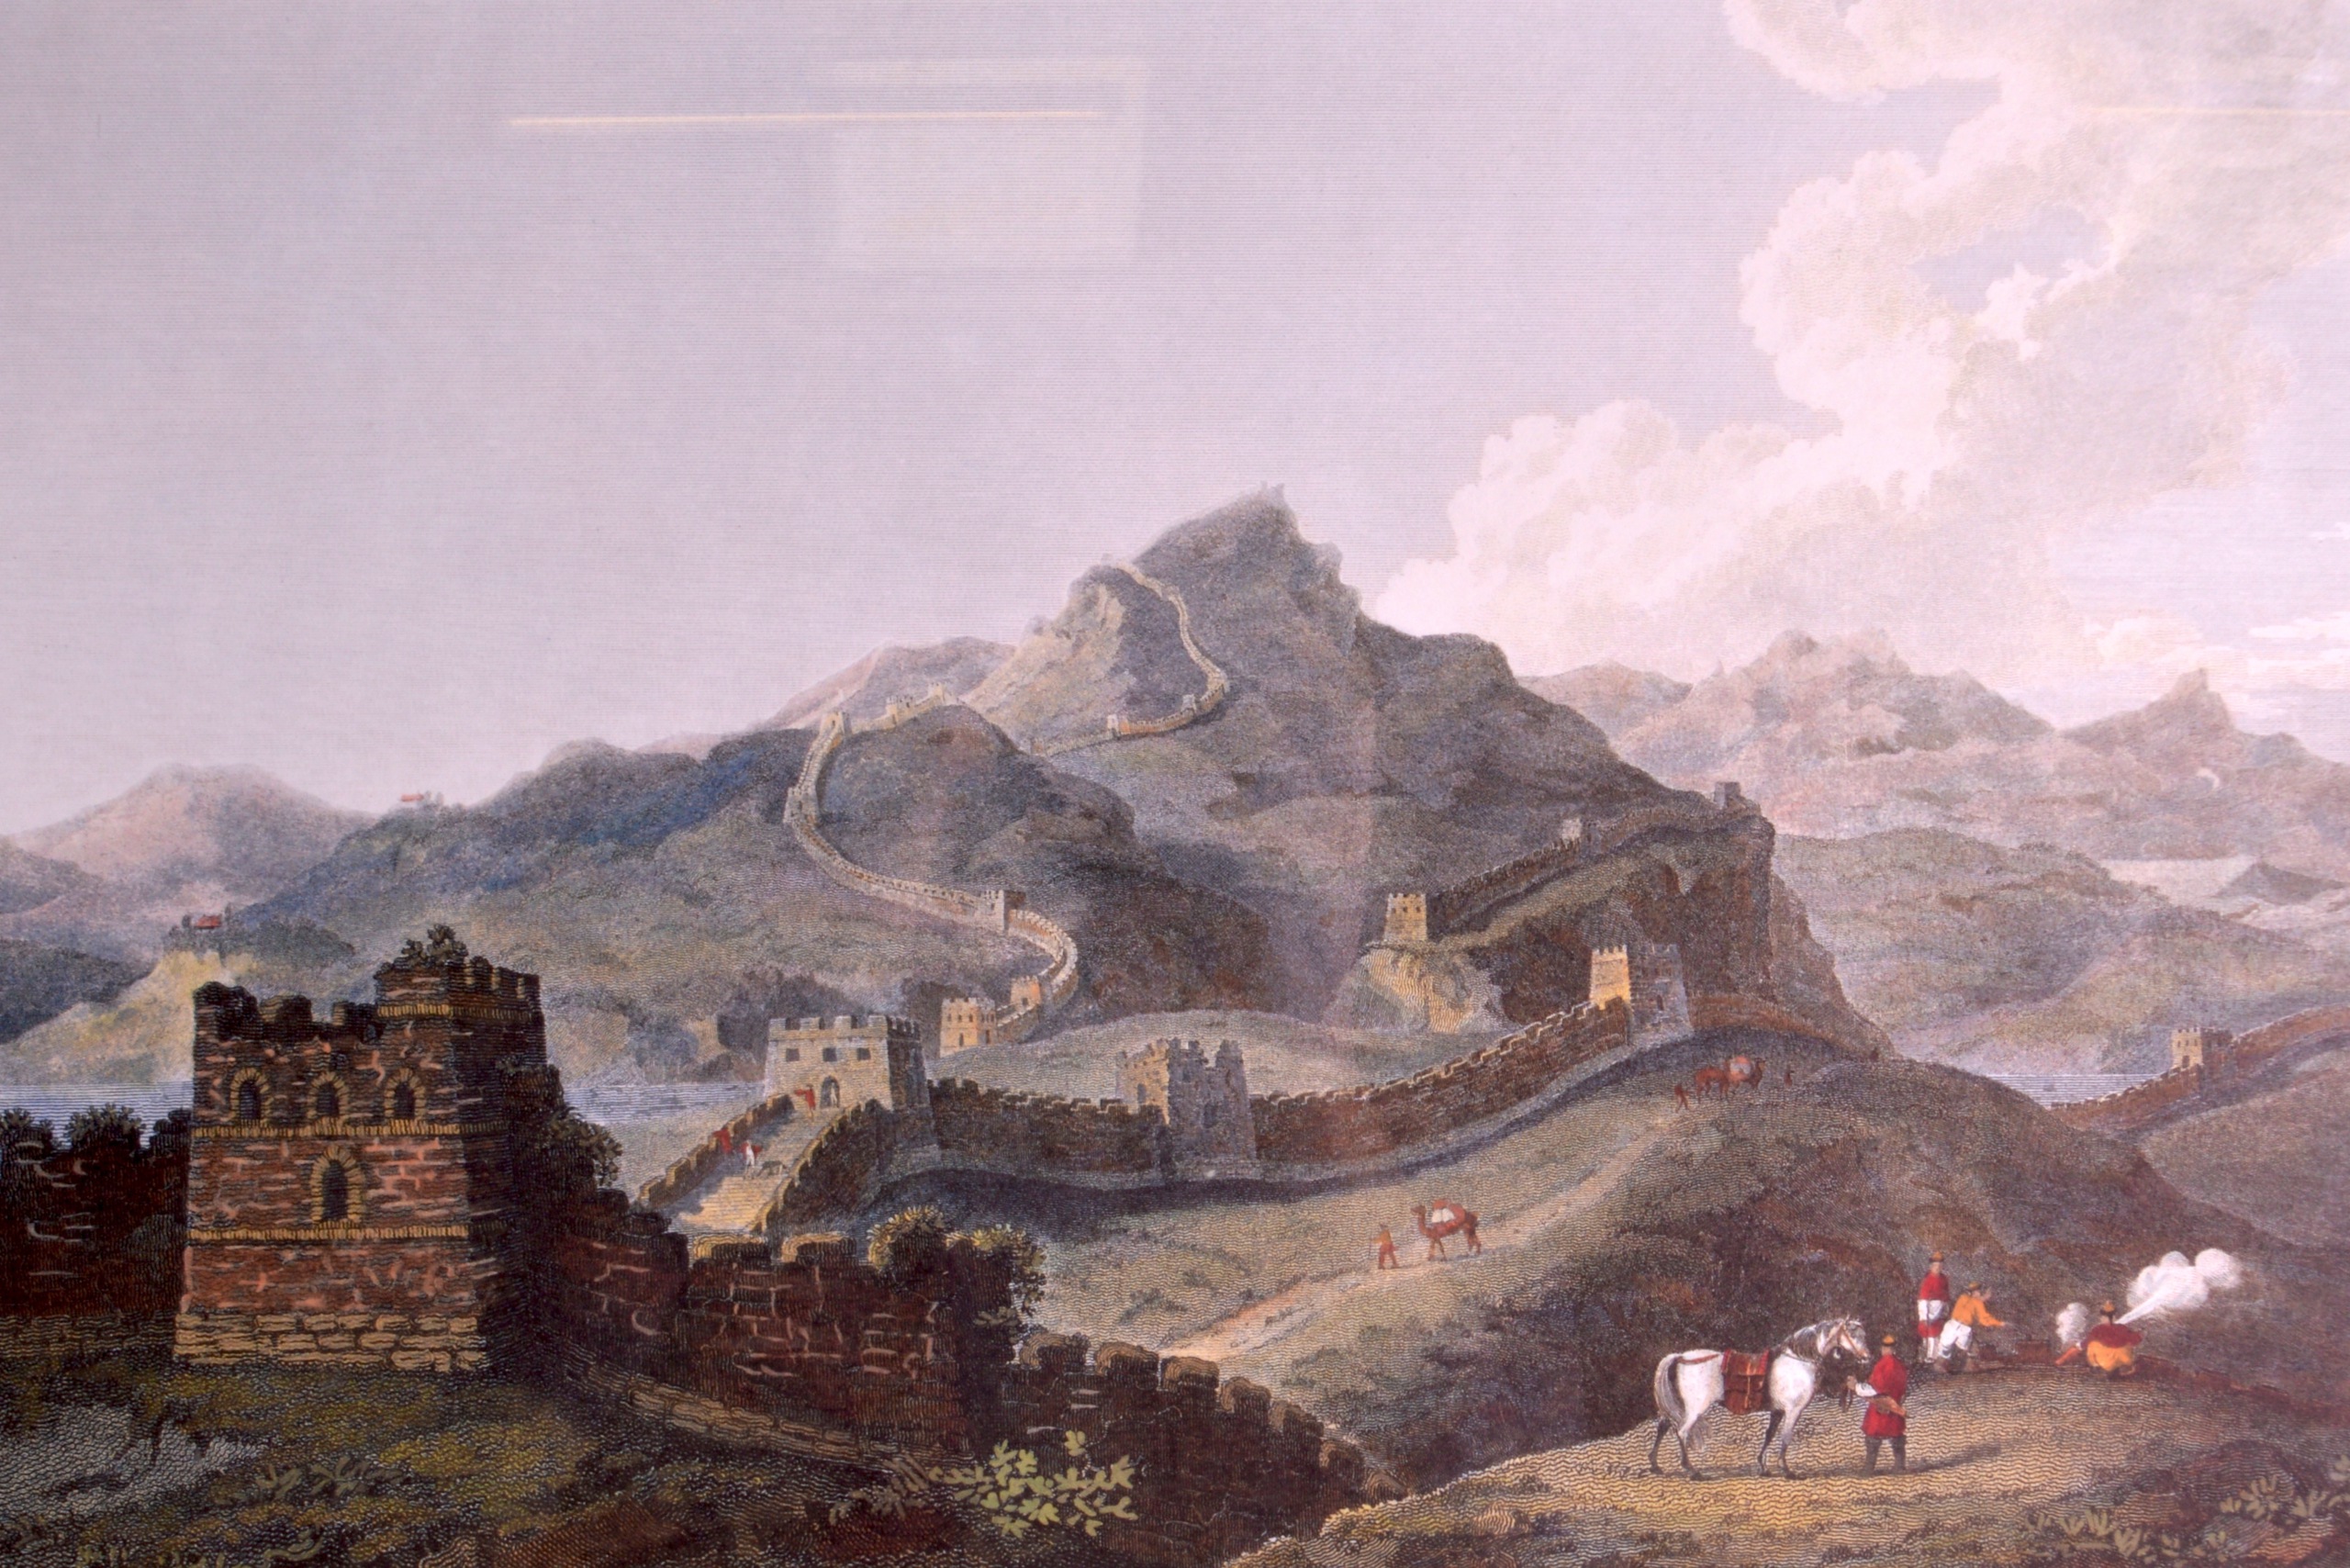 AN INTERESTING PAIR OF FRAMED PRINTS depicting the Great Wall of China, the other showing the